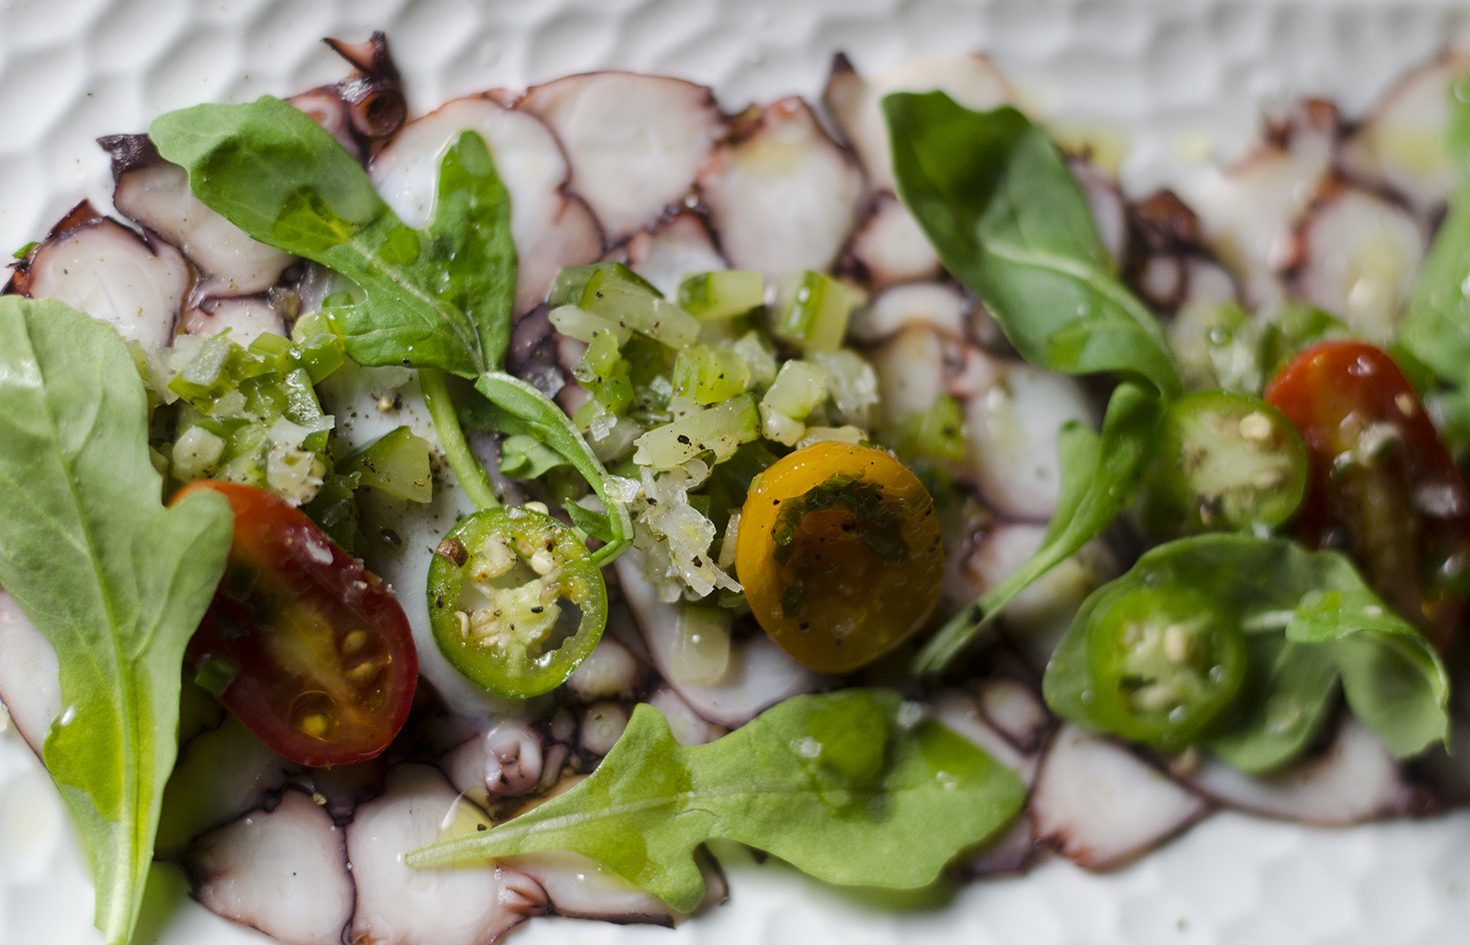 Is this the first time we have had octopus carpaccio in the city?